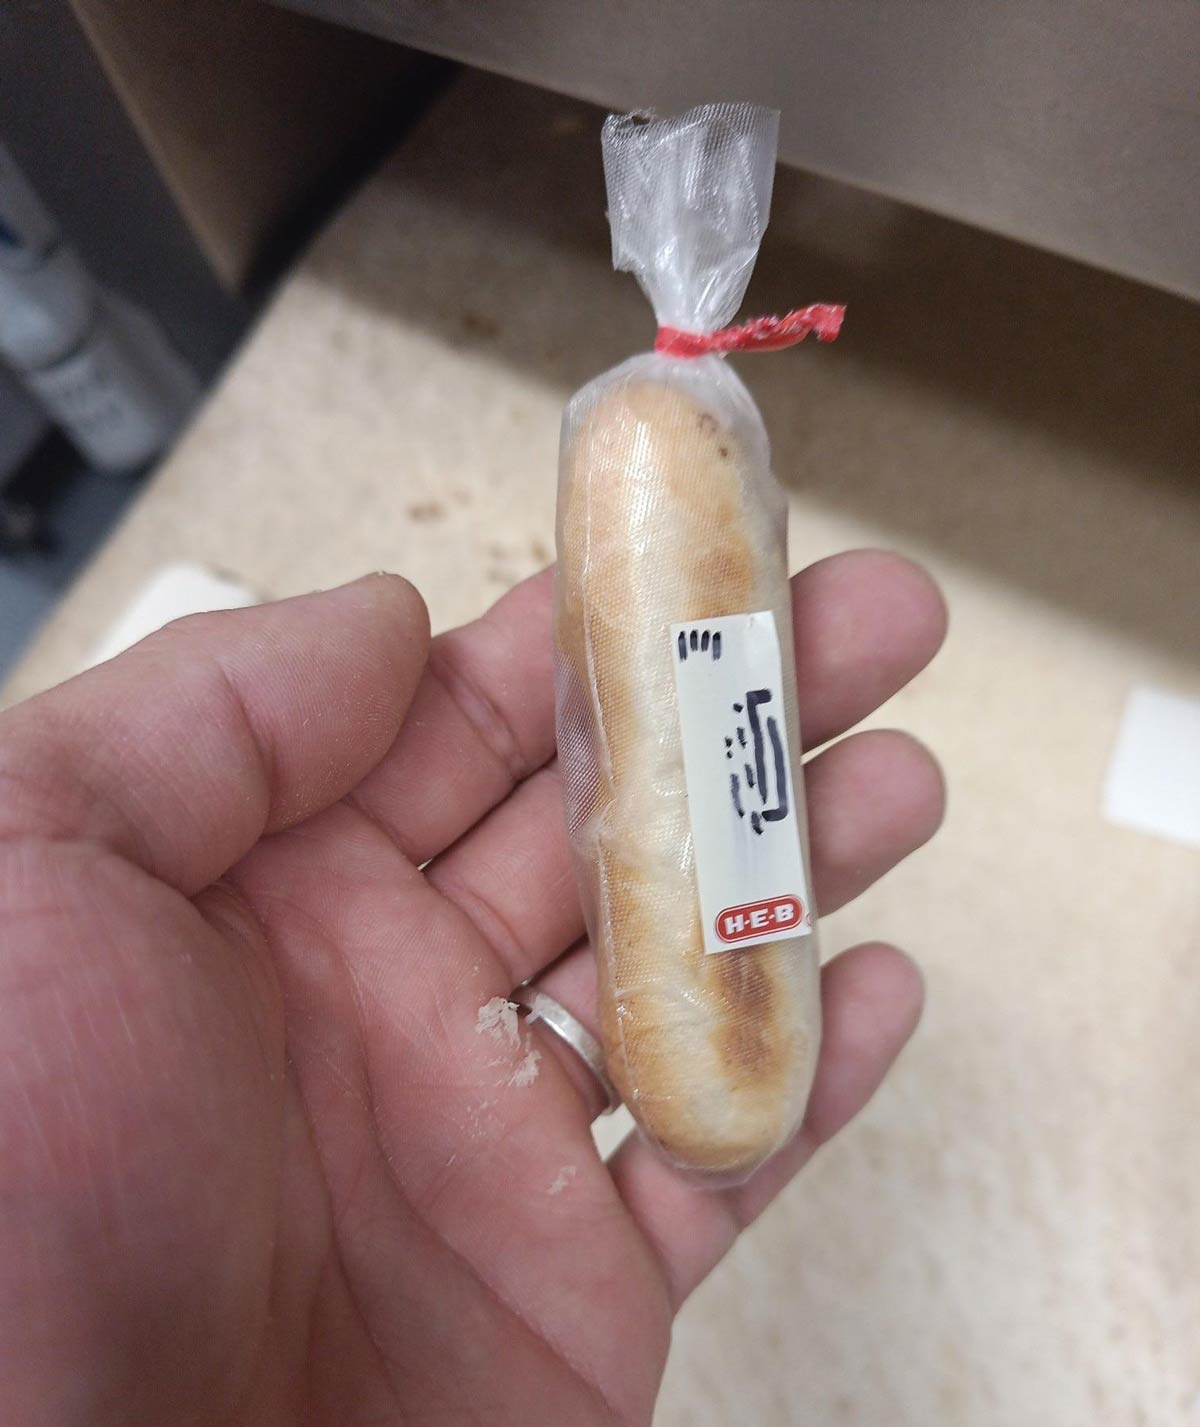 My husband works in the HEB bakery and today he made this tiny baguette